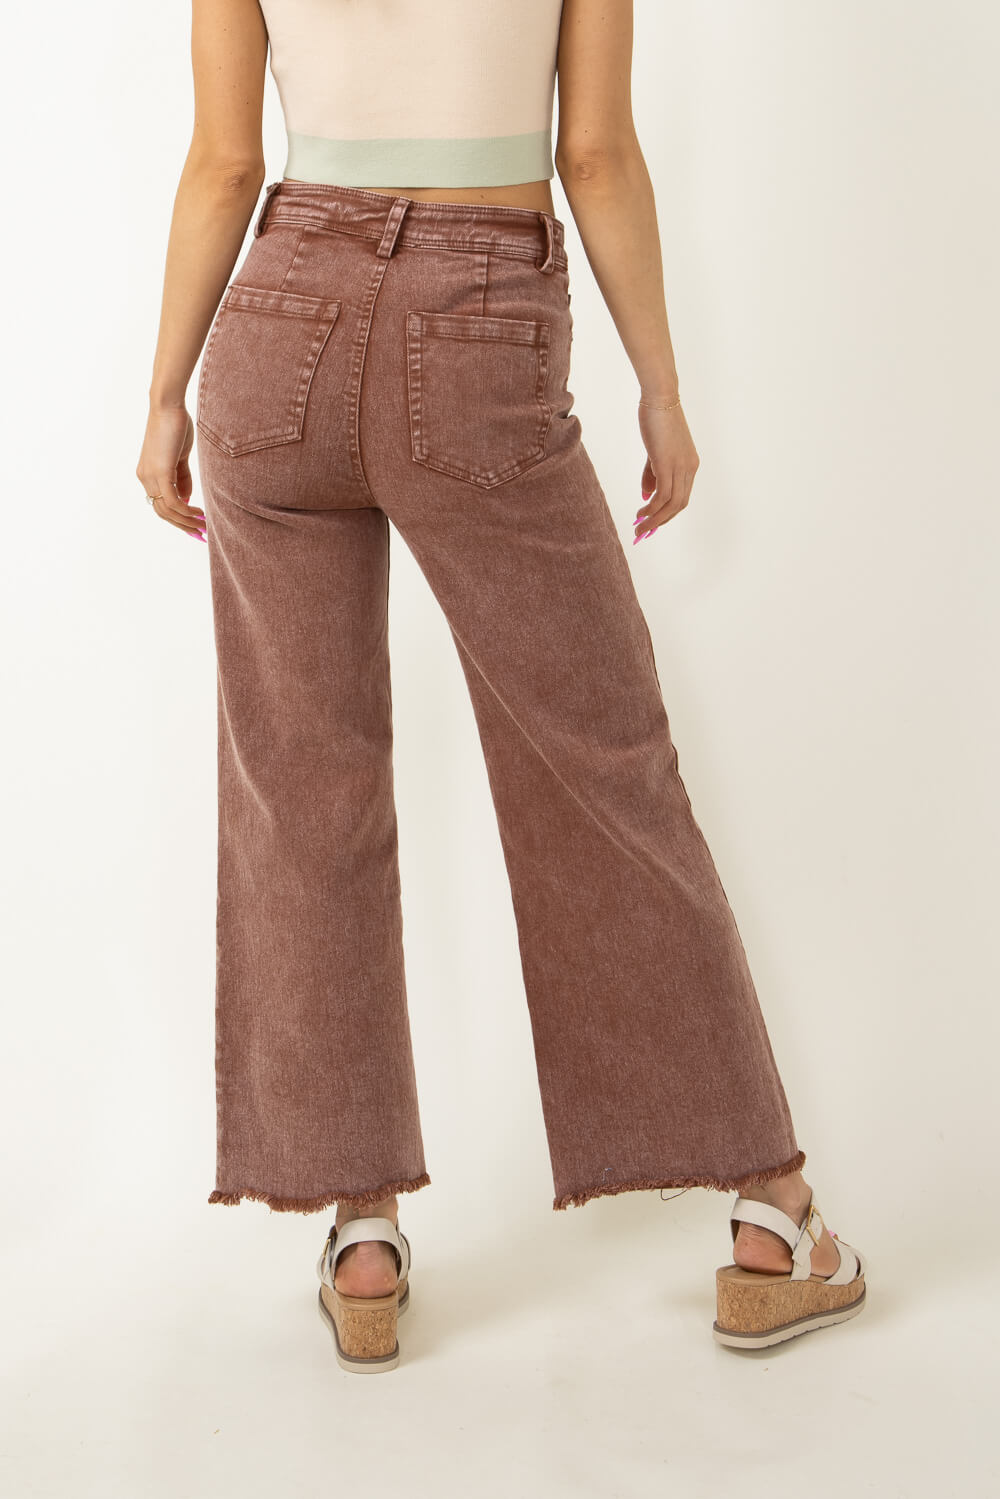 Washed Bell Bottom Front Seam Flare Pants in Taupe - The Rustic